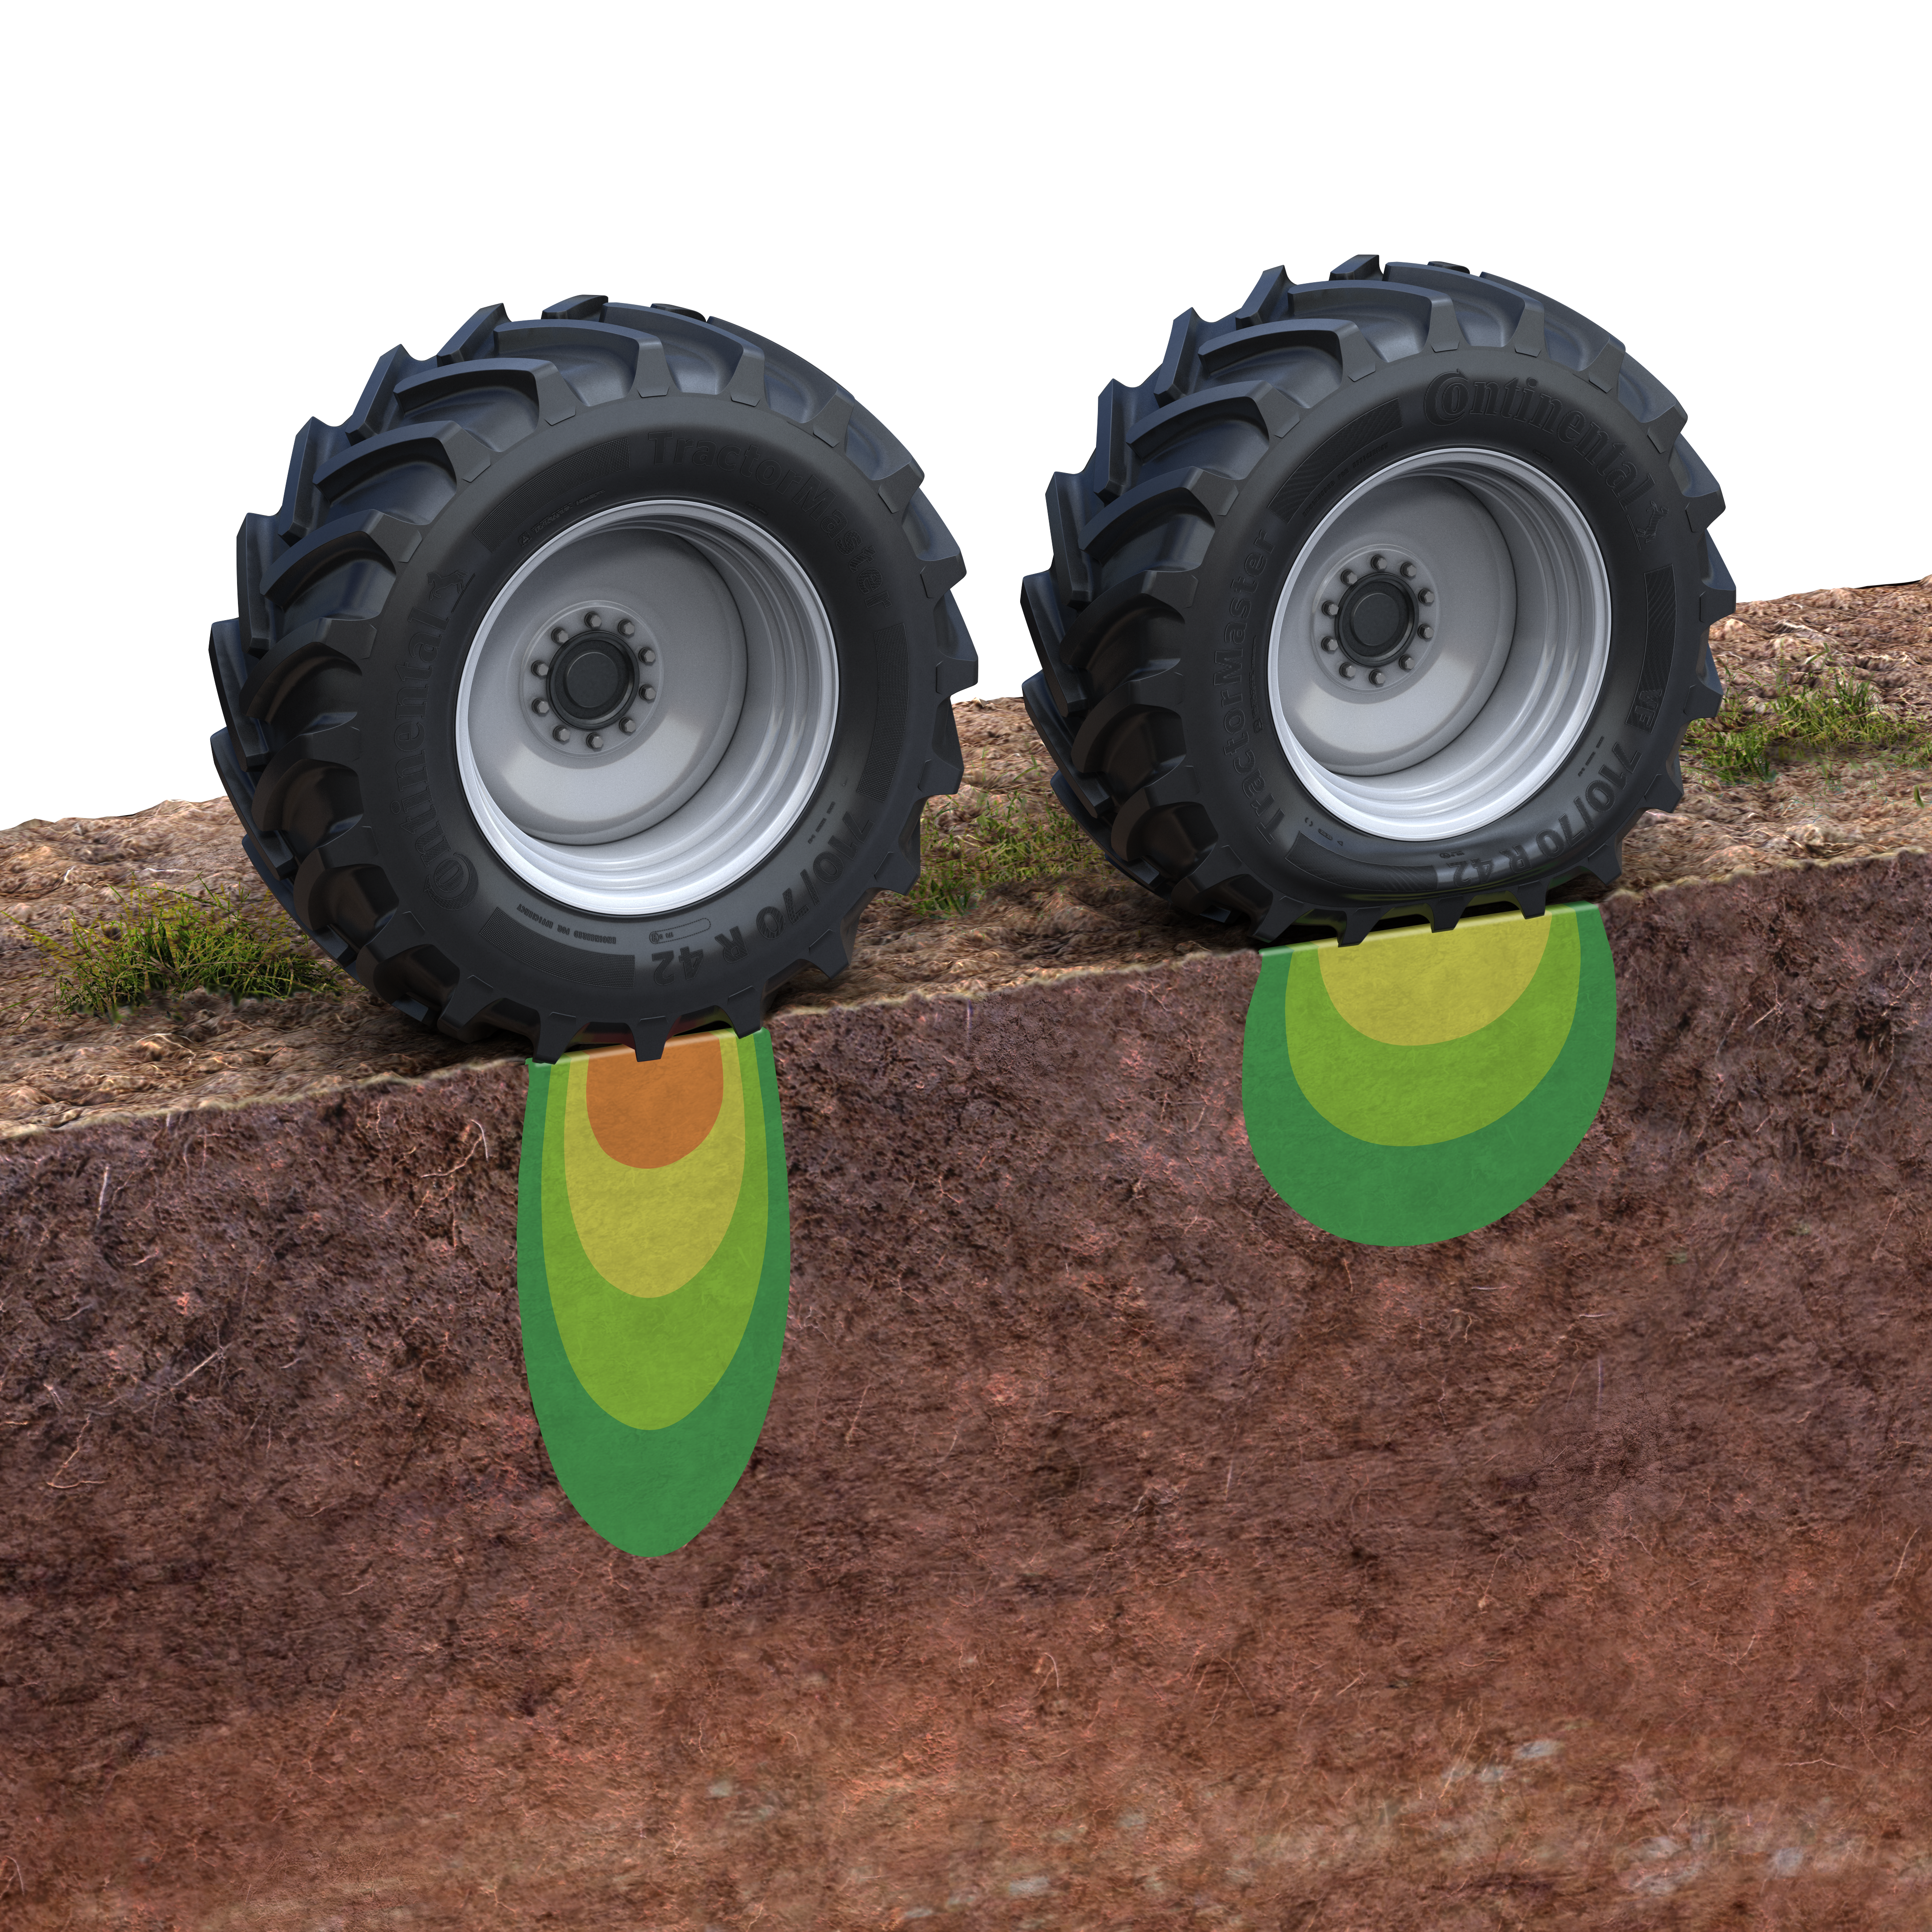 How our agricultural tyres reduce soil compaction